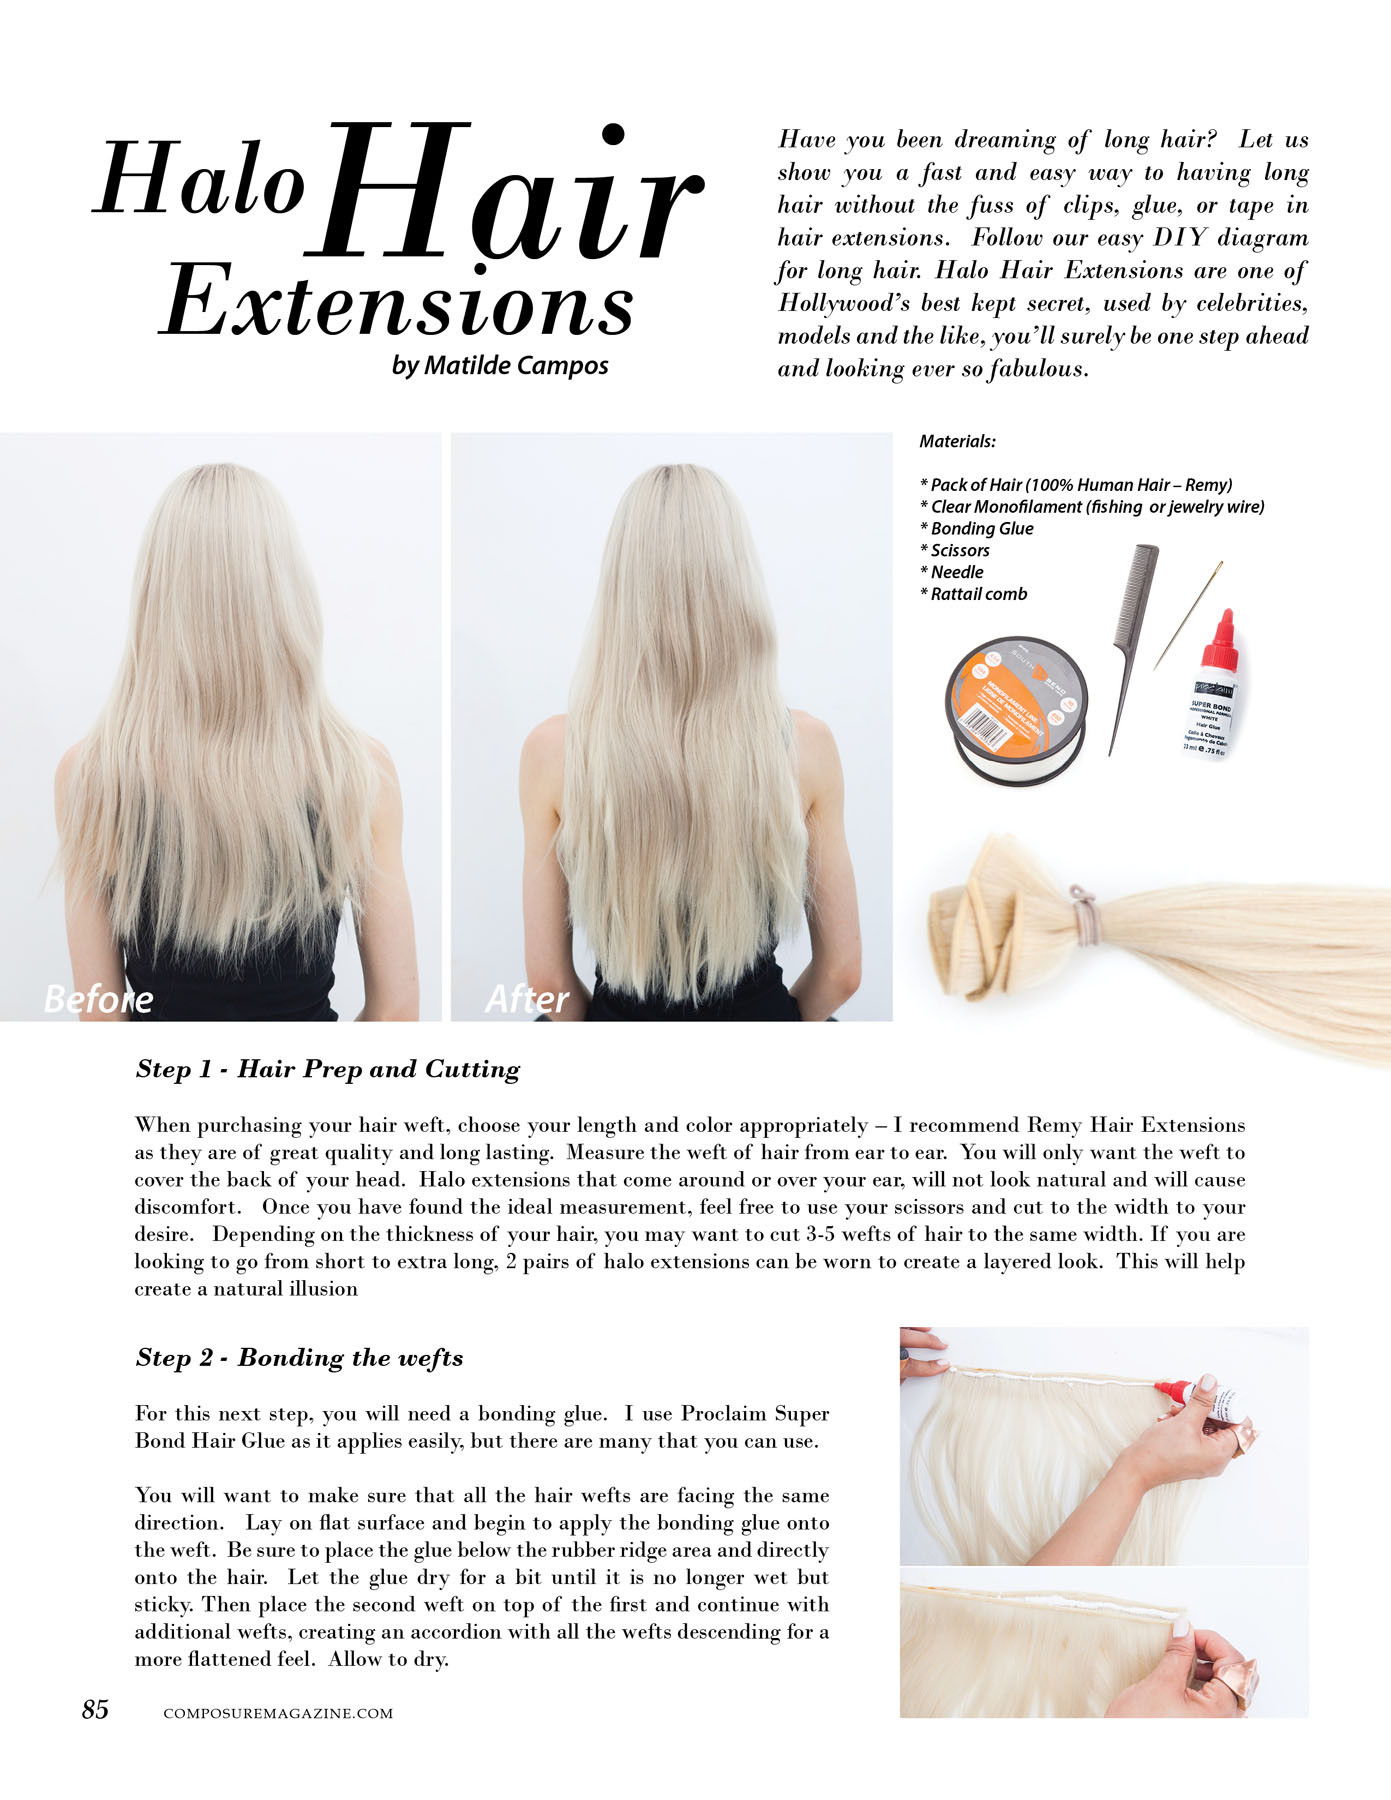 DIY Halo Hair Extensions
 Beauty Halo Hair Extensions – posure Magazine